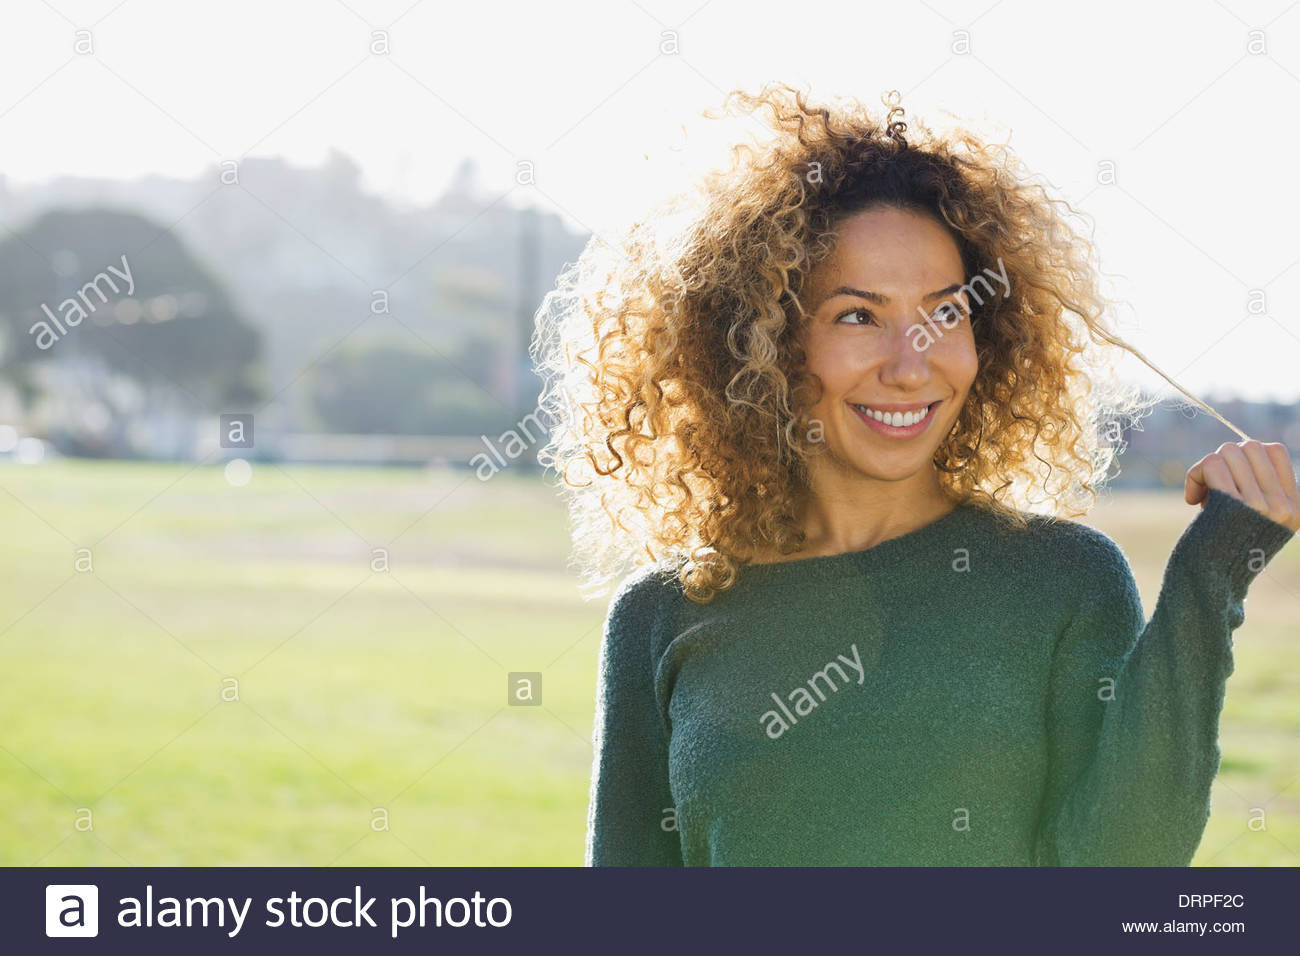 Woman playing with hair outdoors Stock Photo